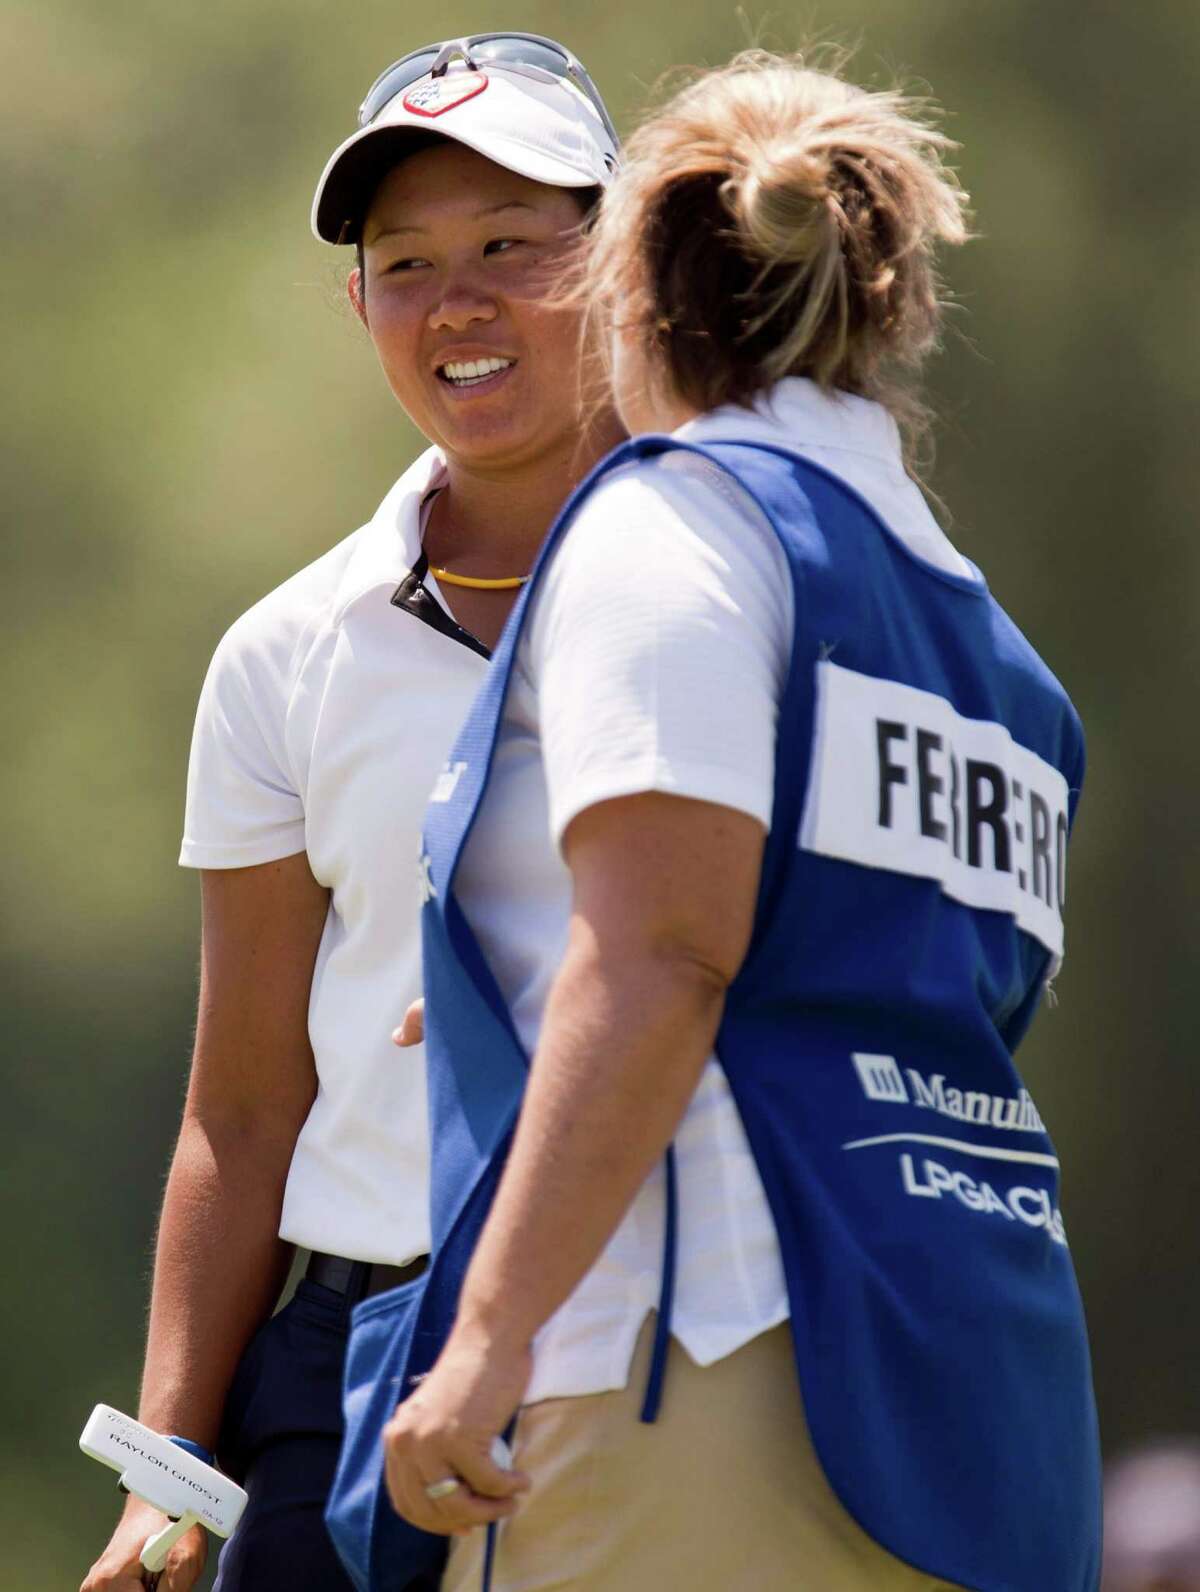 Sandra Changkija, left, smiles as she is congratulated by Lisa Ferrero's caddie after making a birdie putt from the fringe on the eighth green during the first round of the LPGA Classic golf tournament in Waterloo, Ontario on Thursday June 21, 2012.